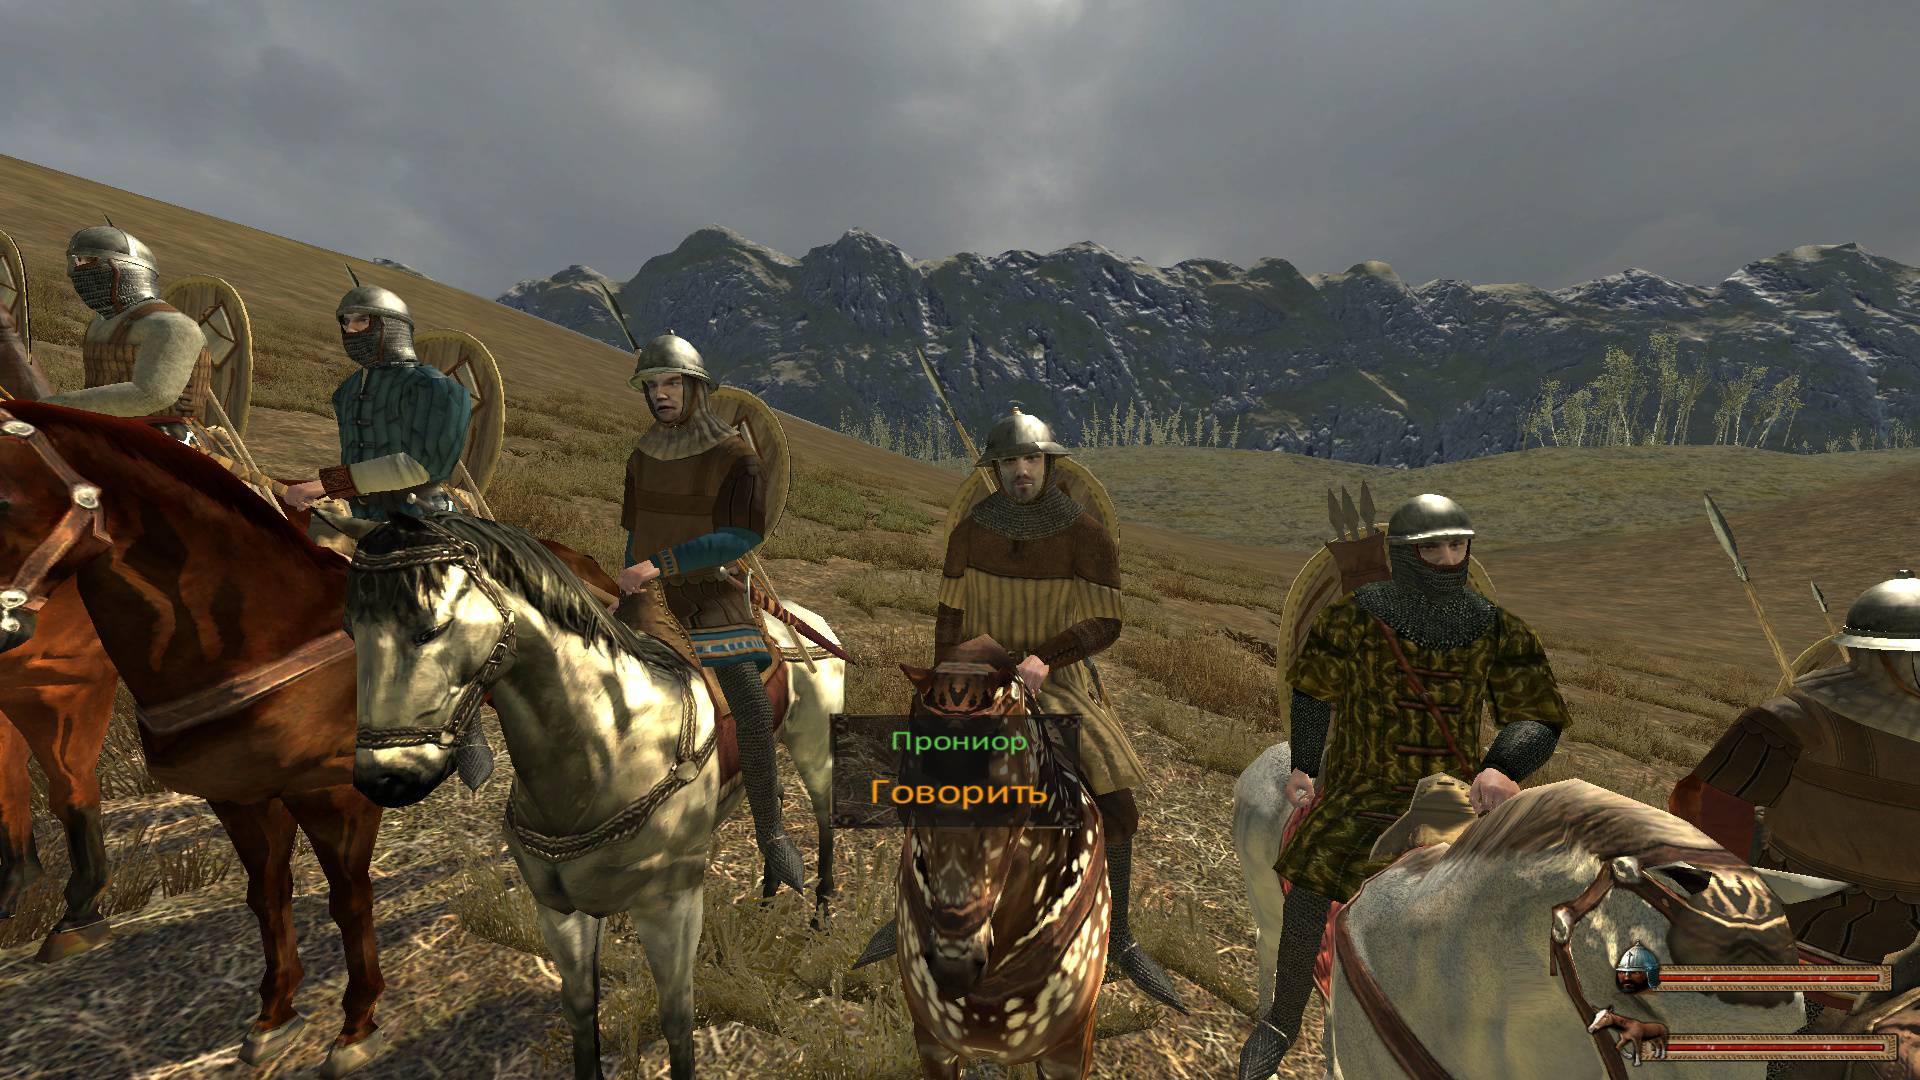 Warband Medieval Conquest. Medieval Conquest Mount Blade Warband. Мод для варбанд Medieval Conquest. Medieval Conquest русификатор. Стим warband